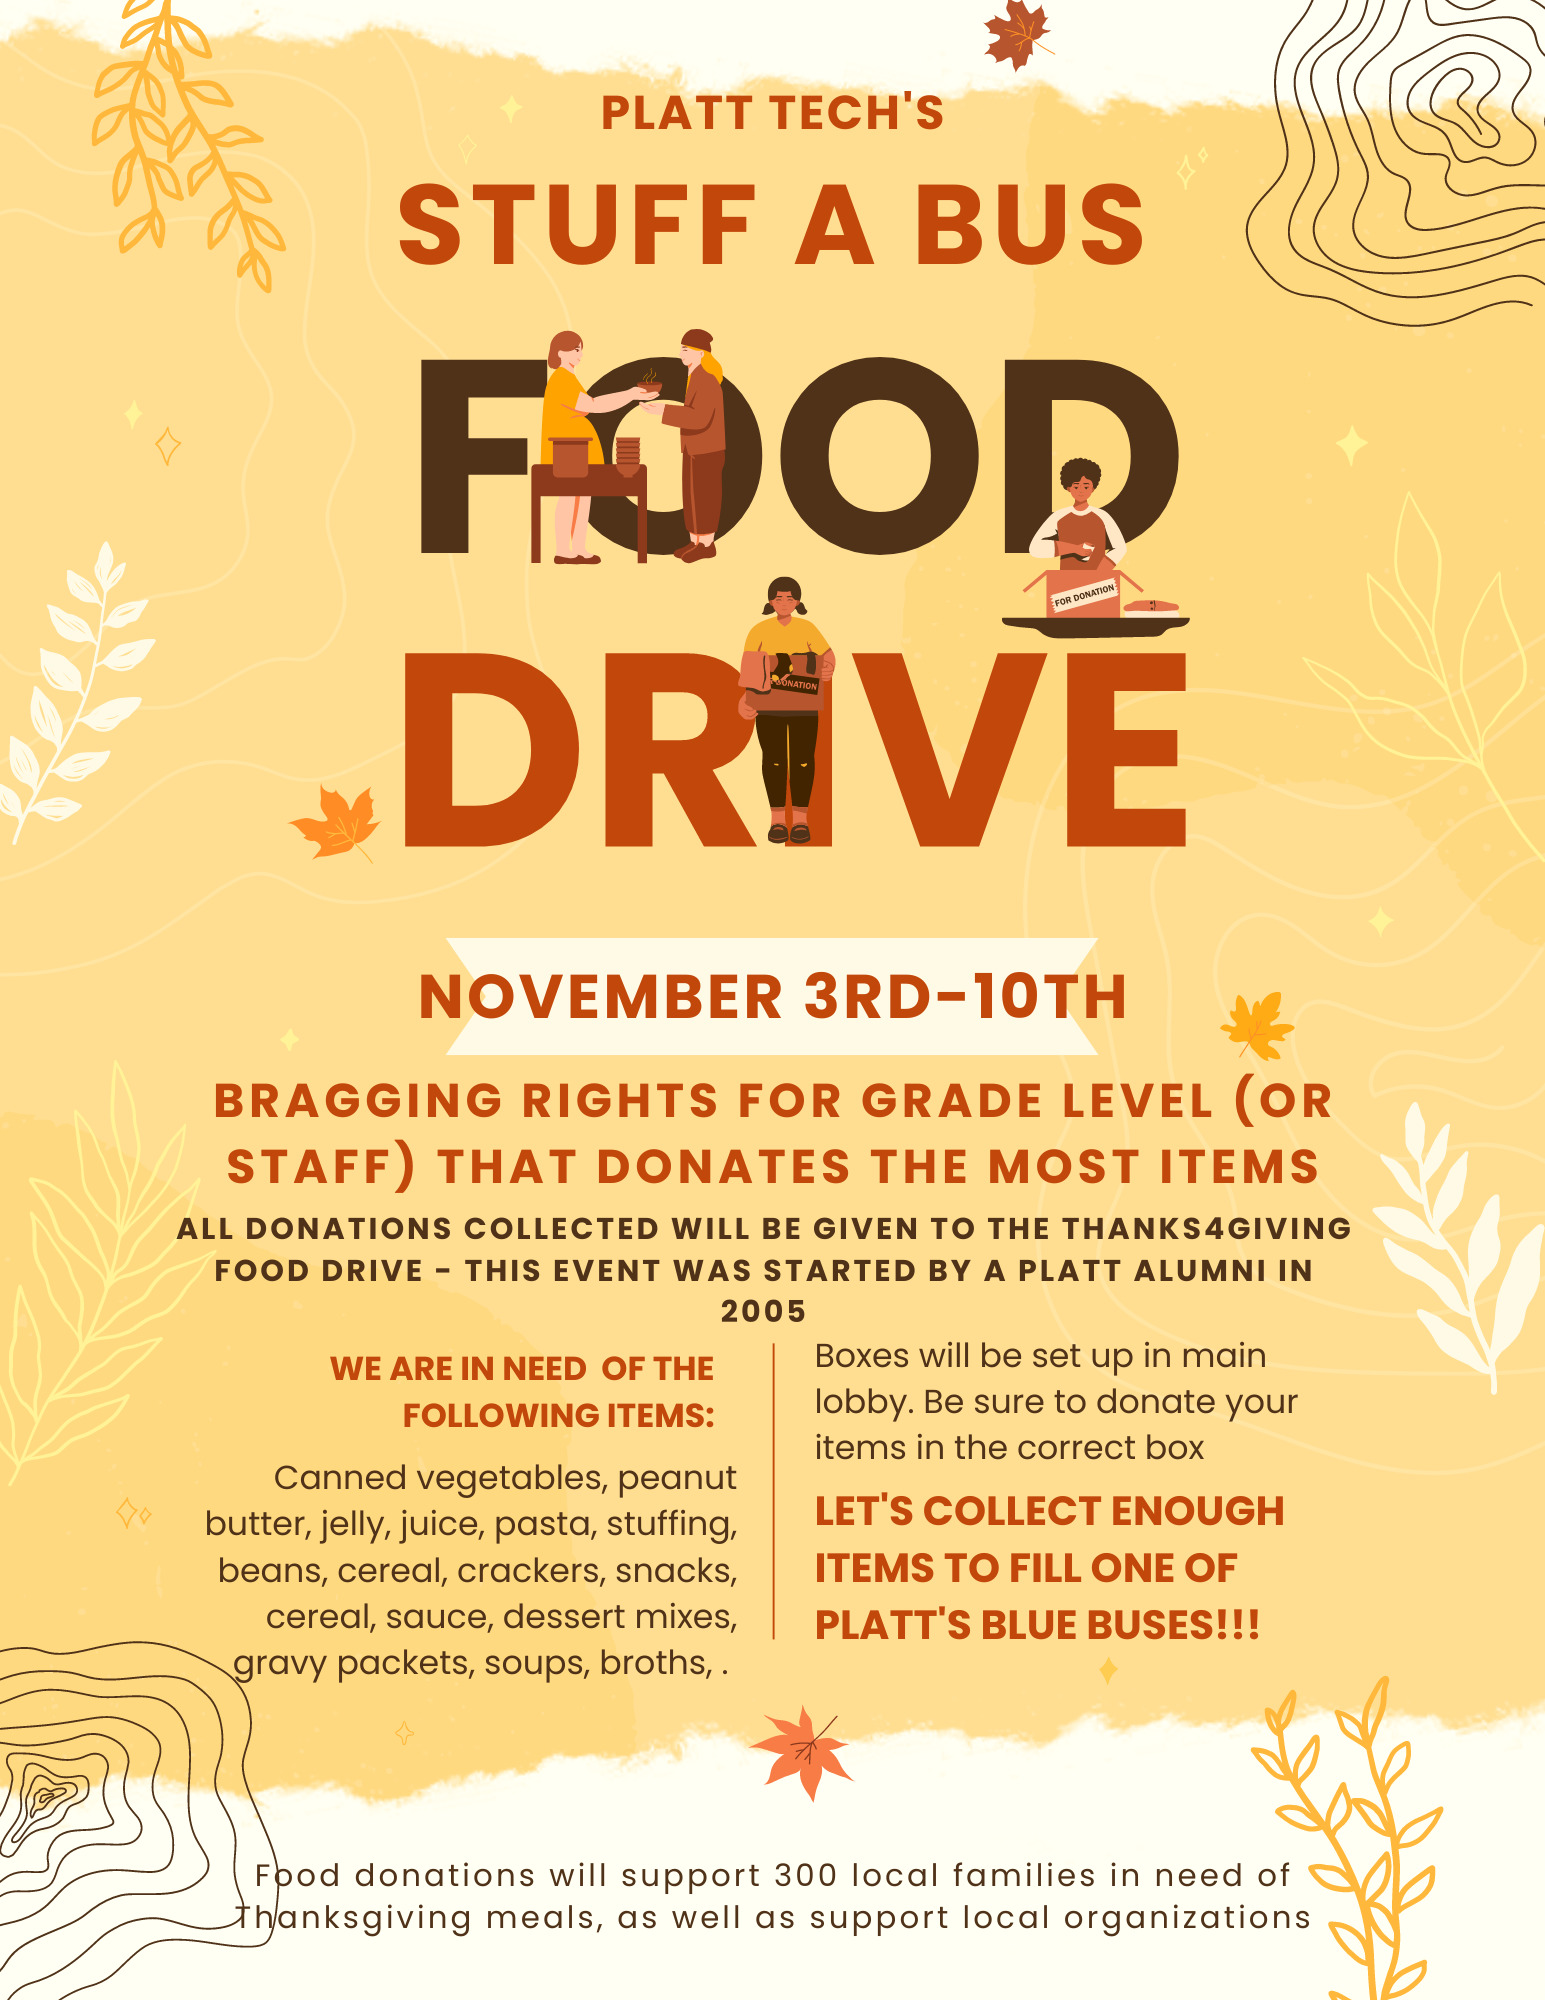 Food Drive from November 3rd to the 10th